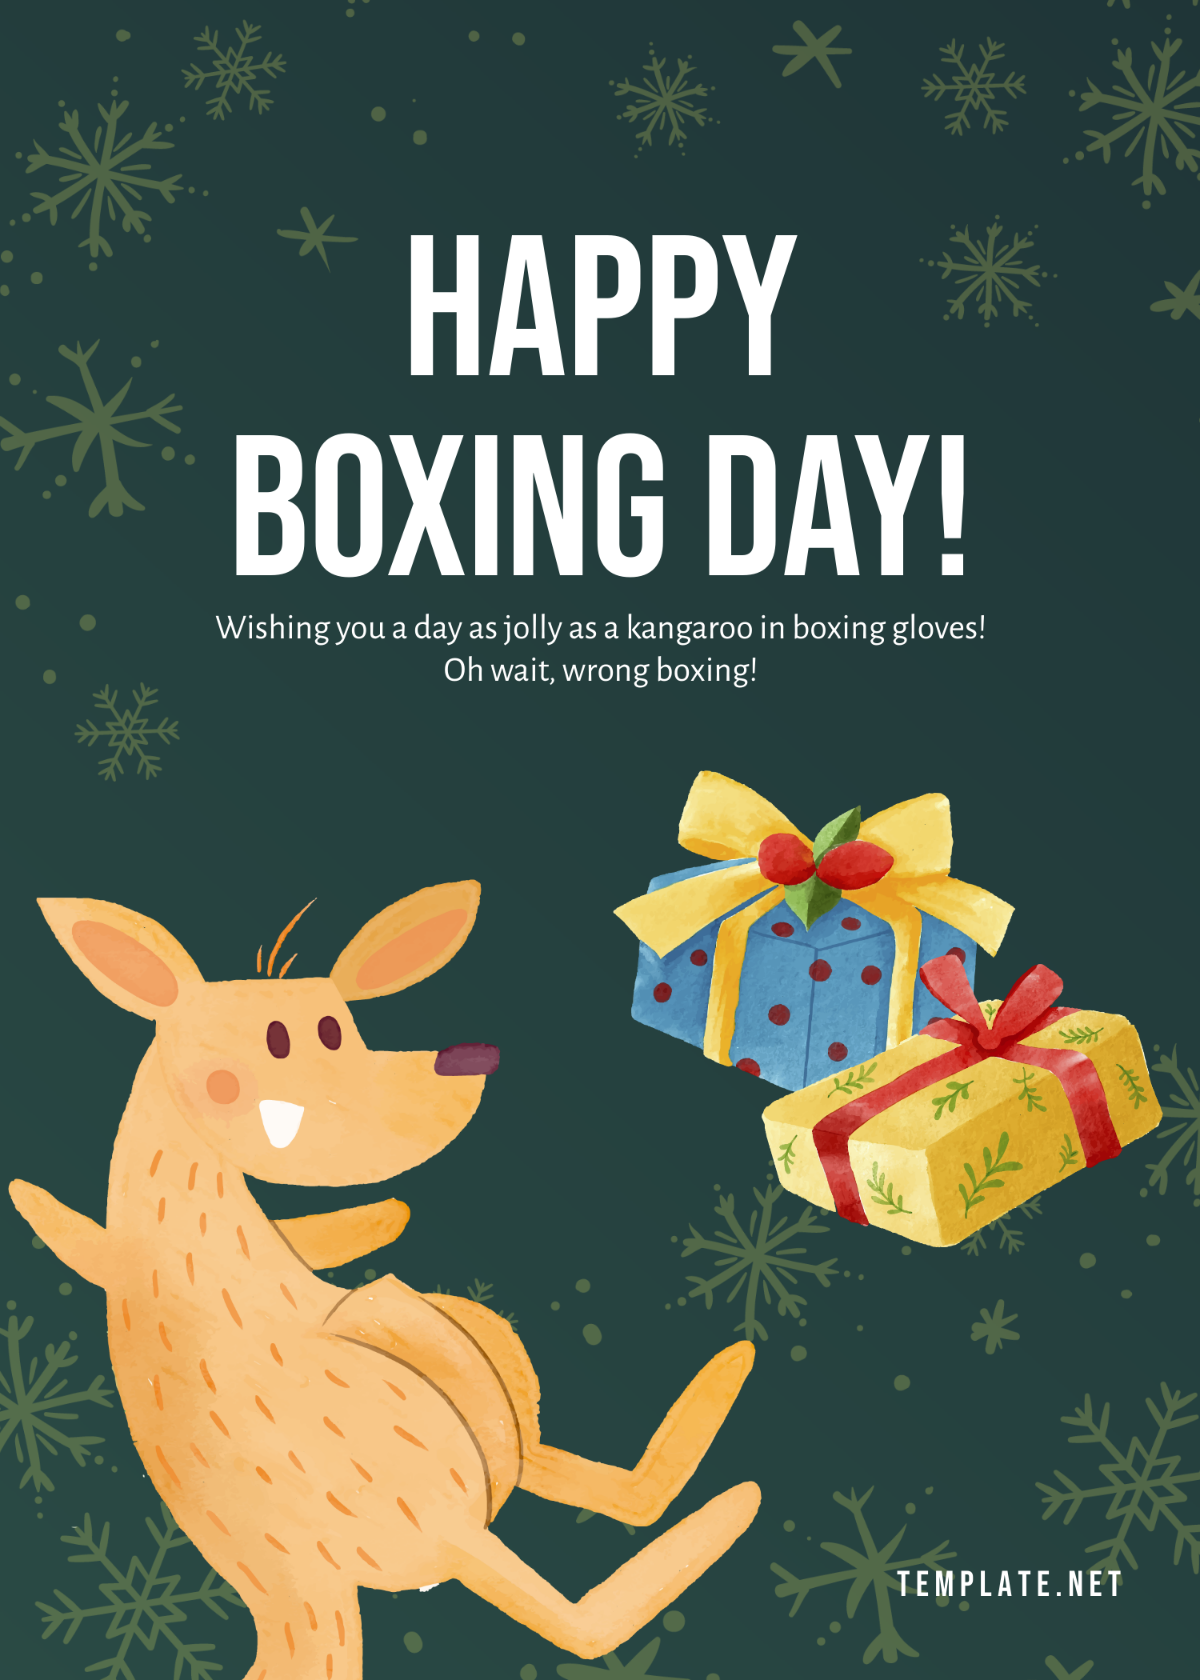 Funny Happy Boxing Day Wishes Template